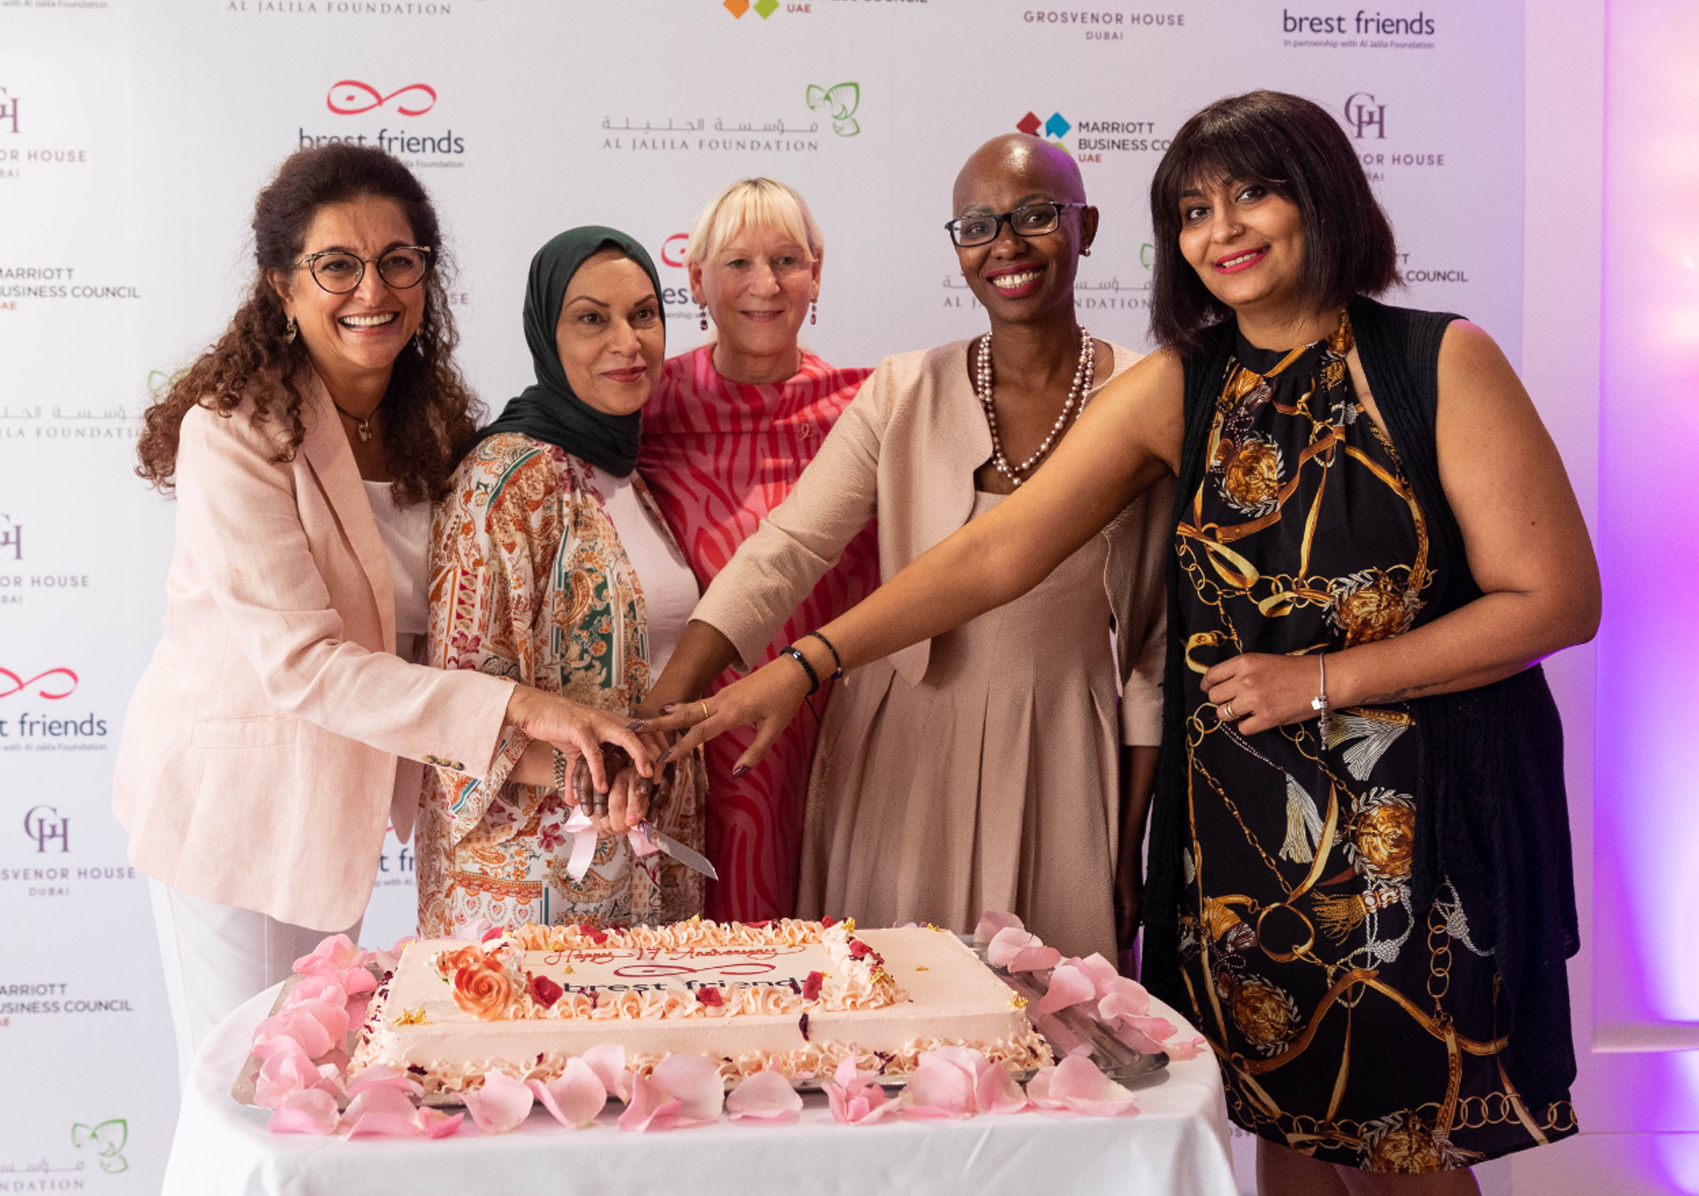 Brest Friends celebrate 17 years of giving hope to breast cancer patients in the UAE